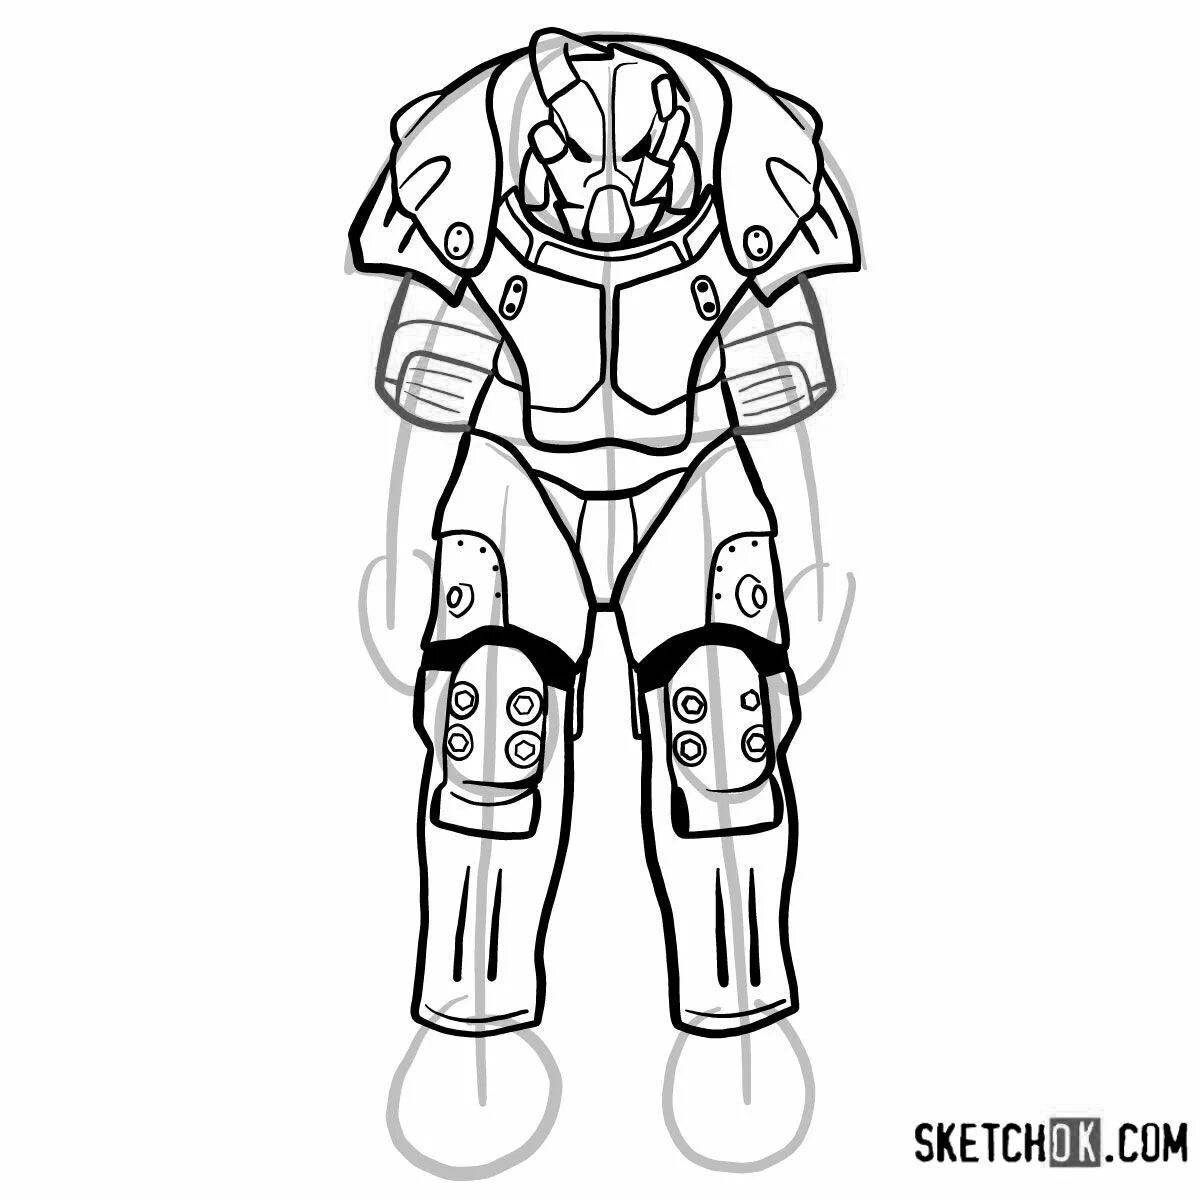 Fallout 4 power armor skins